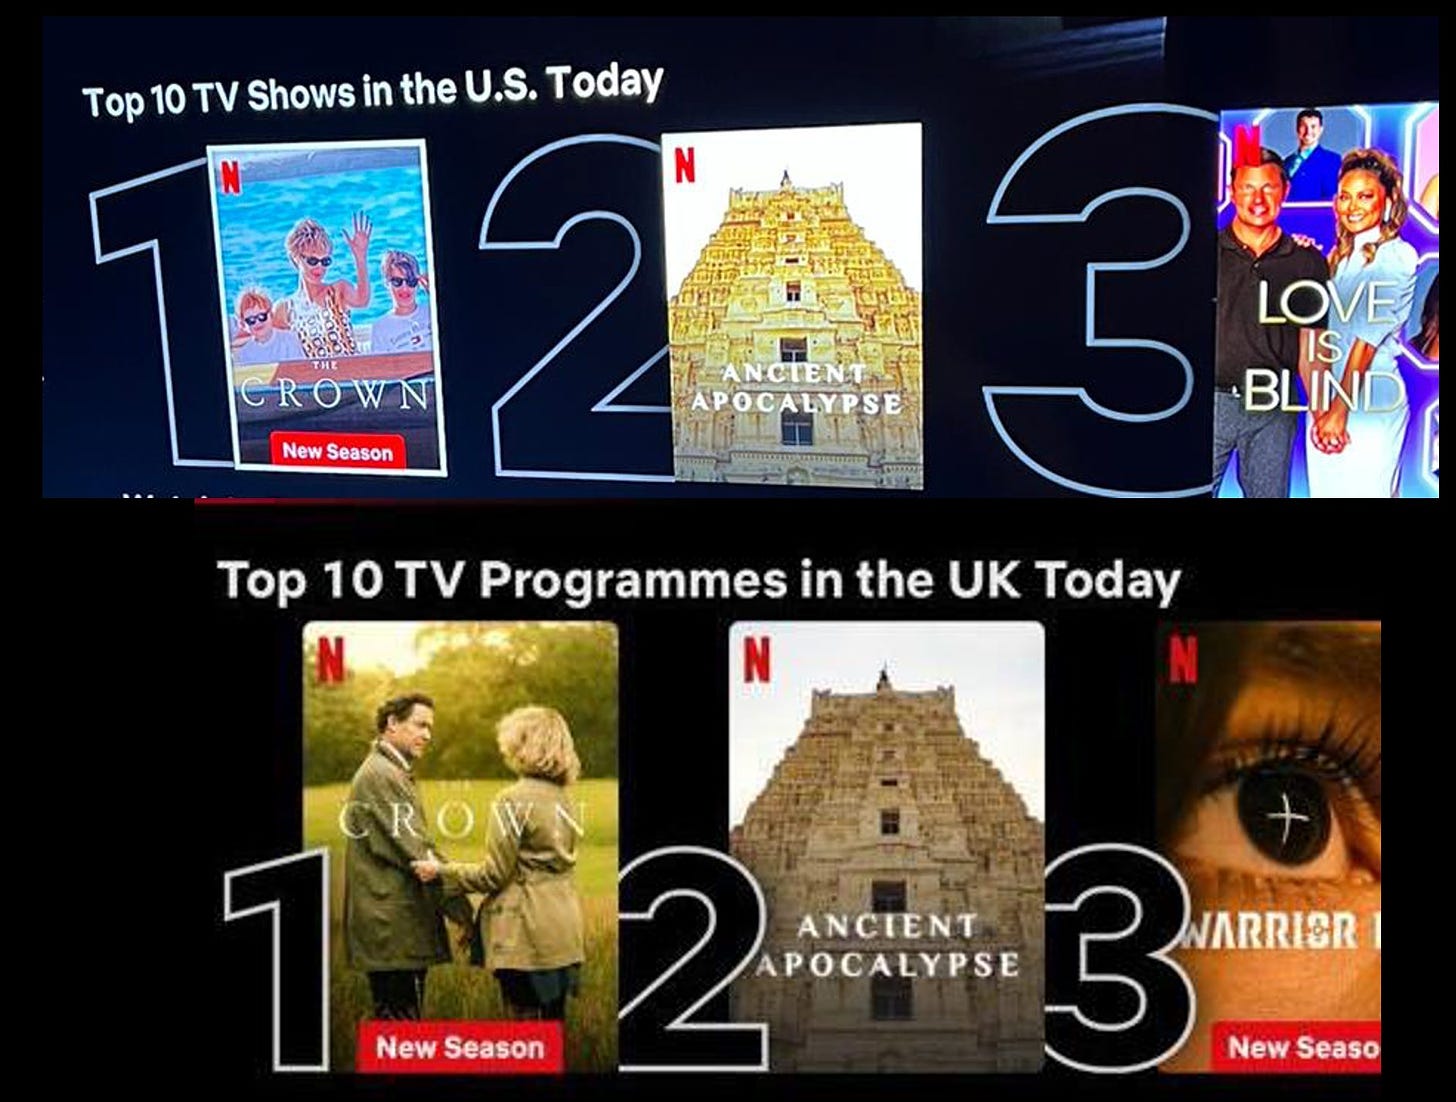 May be an image of 7 people and text that says 'Top 10 TV Shows in the U.S. Today LOVE CROWN New Season 25 2 APOCALYPSE 3 BLIND IS Top 10TV Programmes in the UK Today 1 New Season 2 APOCALYPSE ANCIENT 3MPET 3 WARRISR New Seaso'